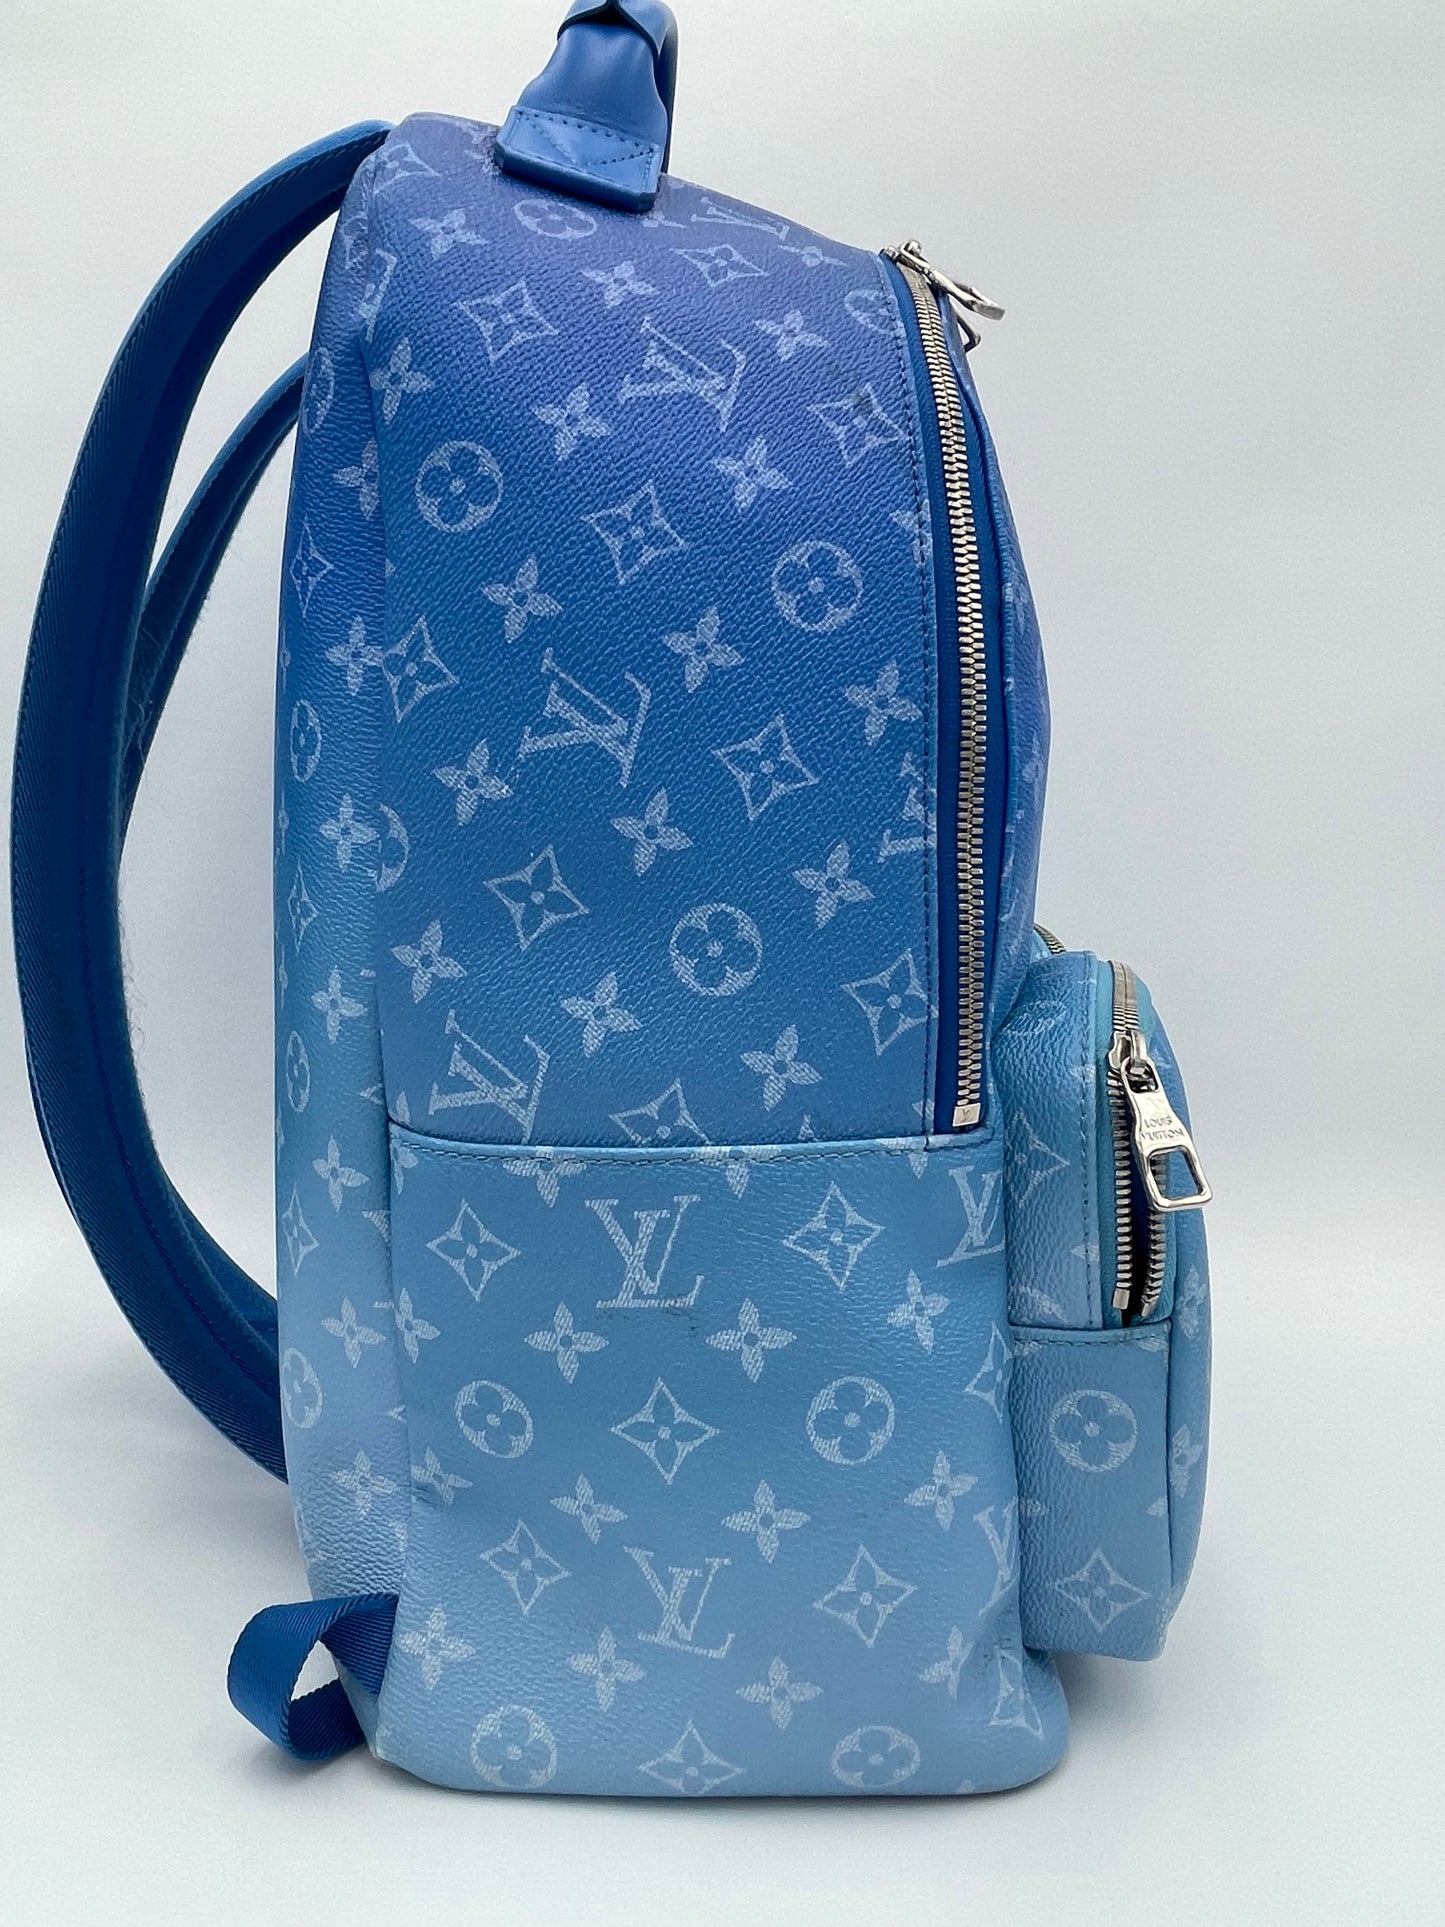 LOUIS VUTTION LIMITED EDITION MONOGRAM CLOUDS